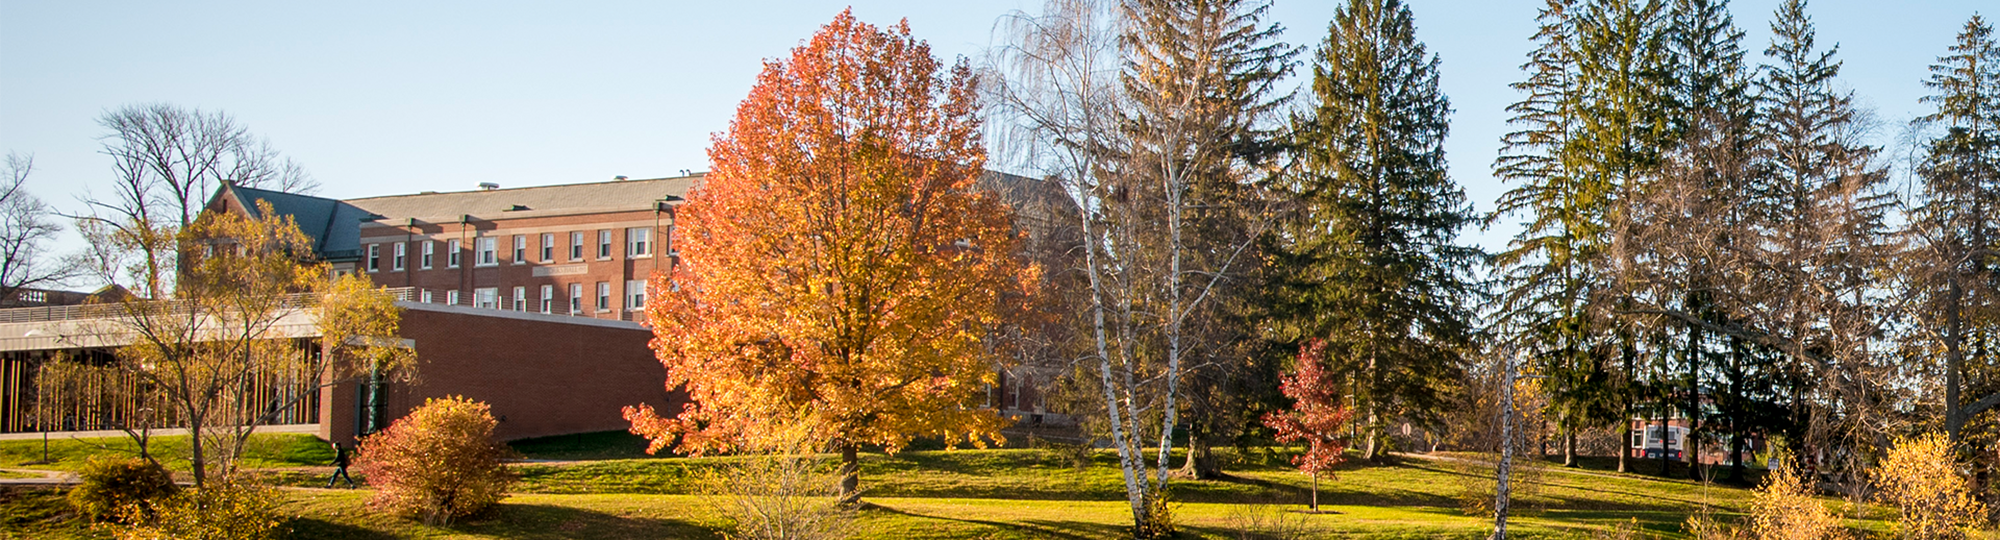 Storrs Hall in autumn